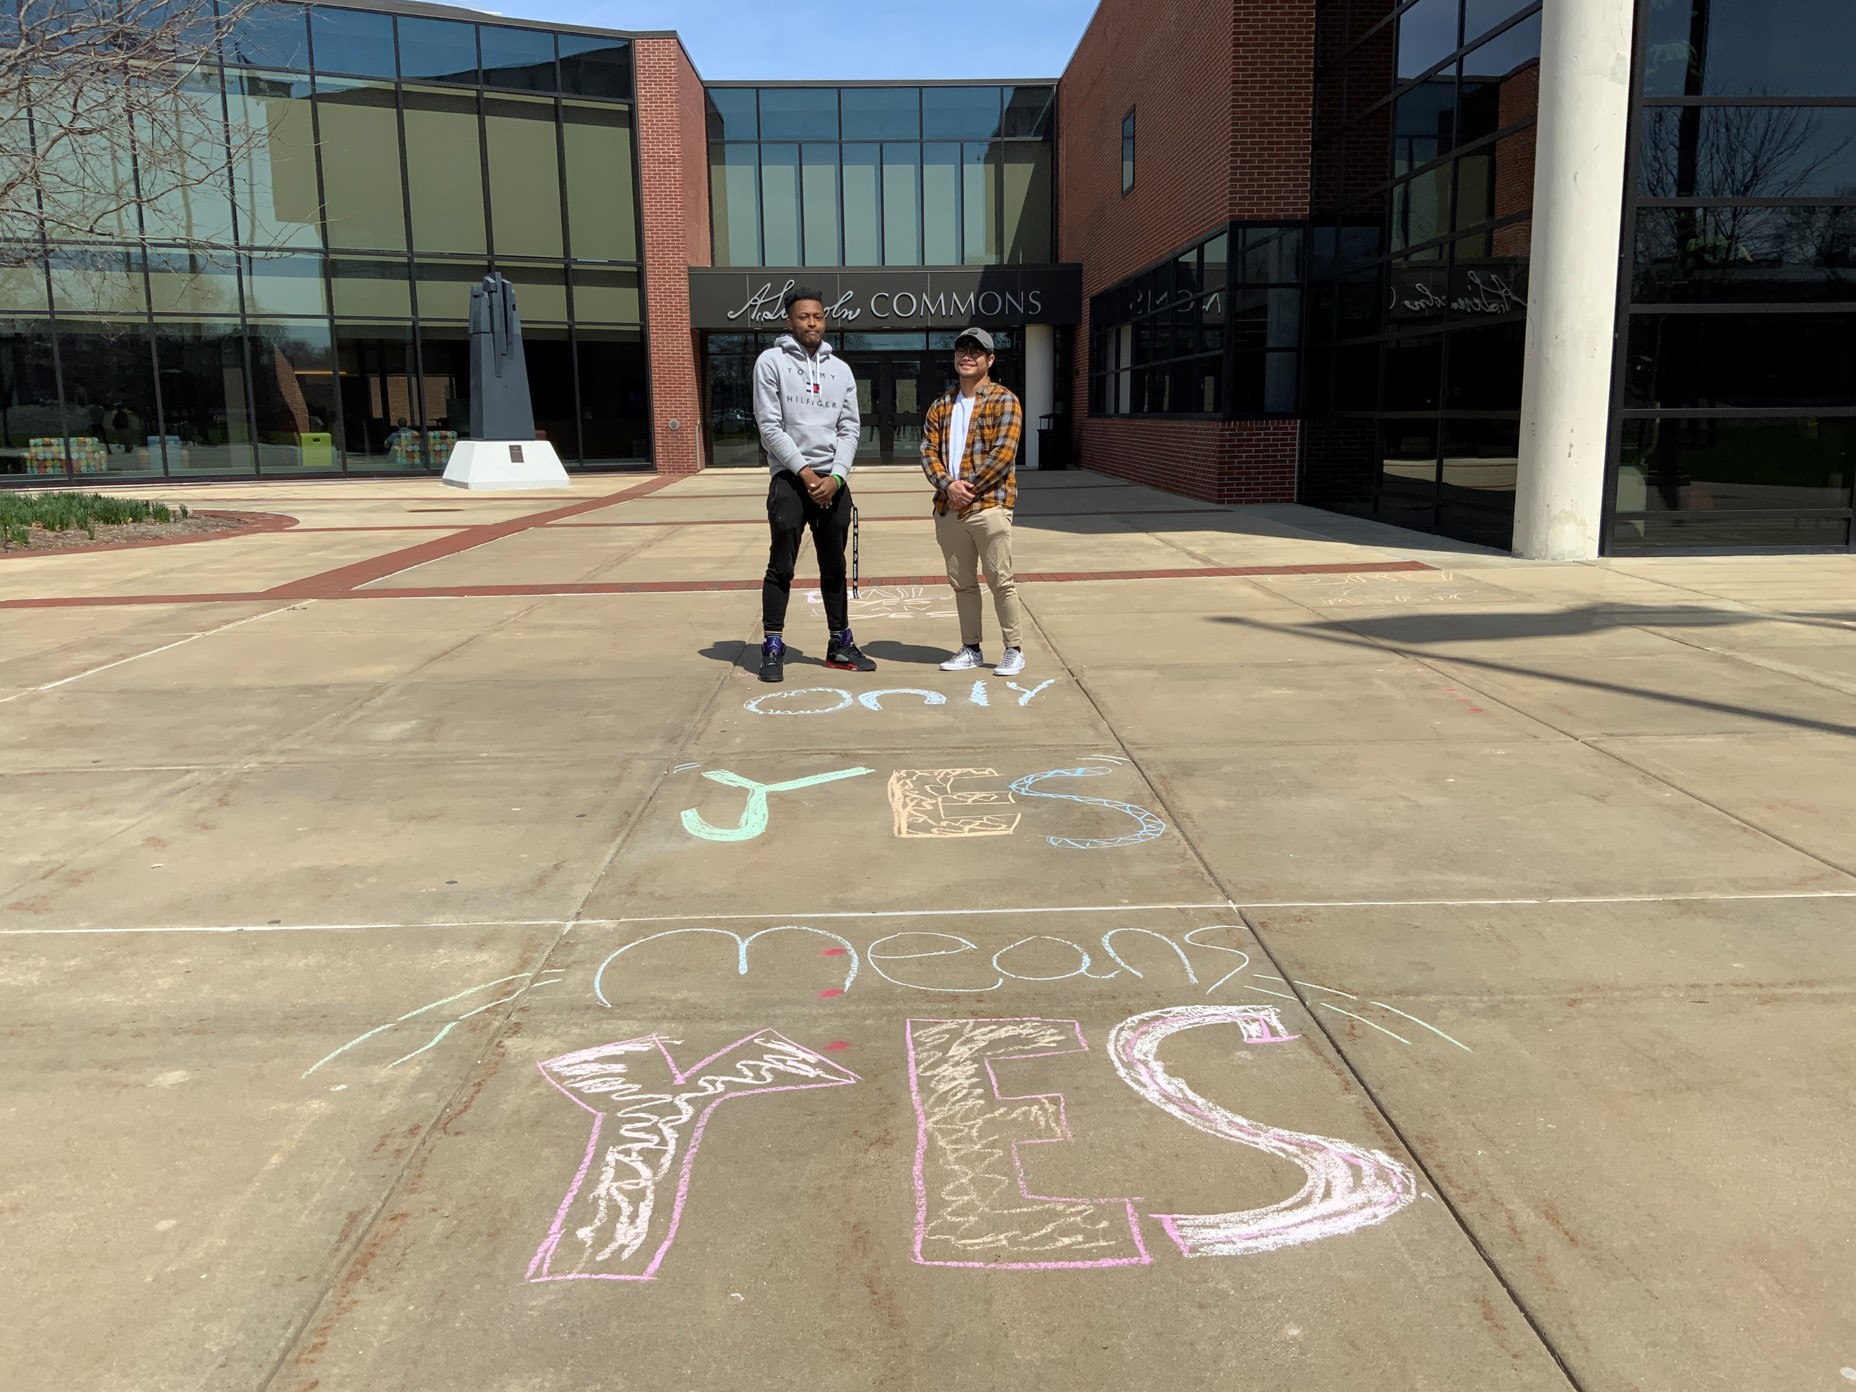 Two male students in front of A. Lincoln Commons. Sidewalk says, "Only yes means yes."